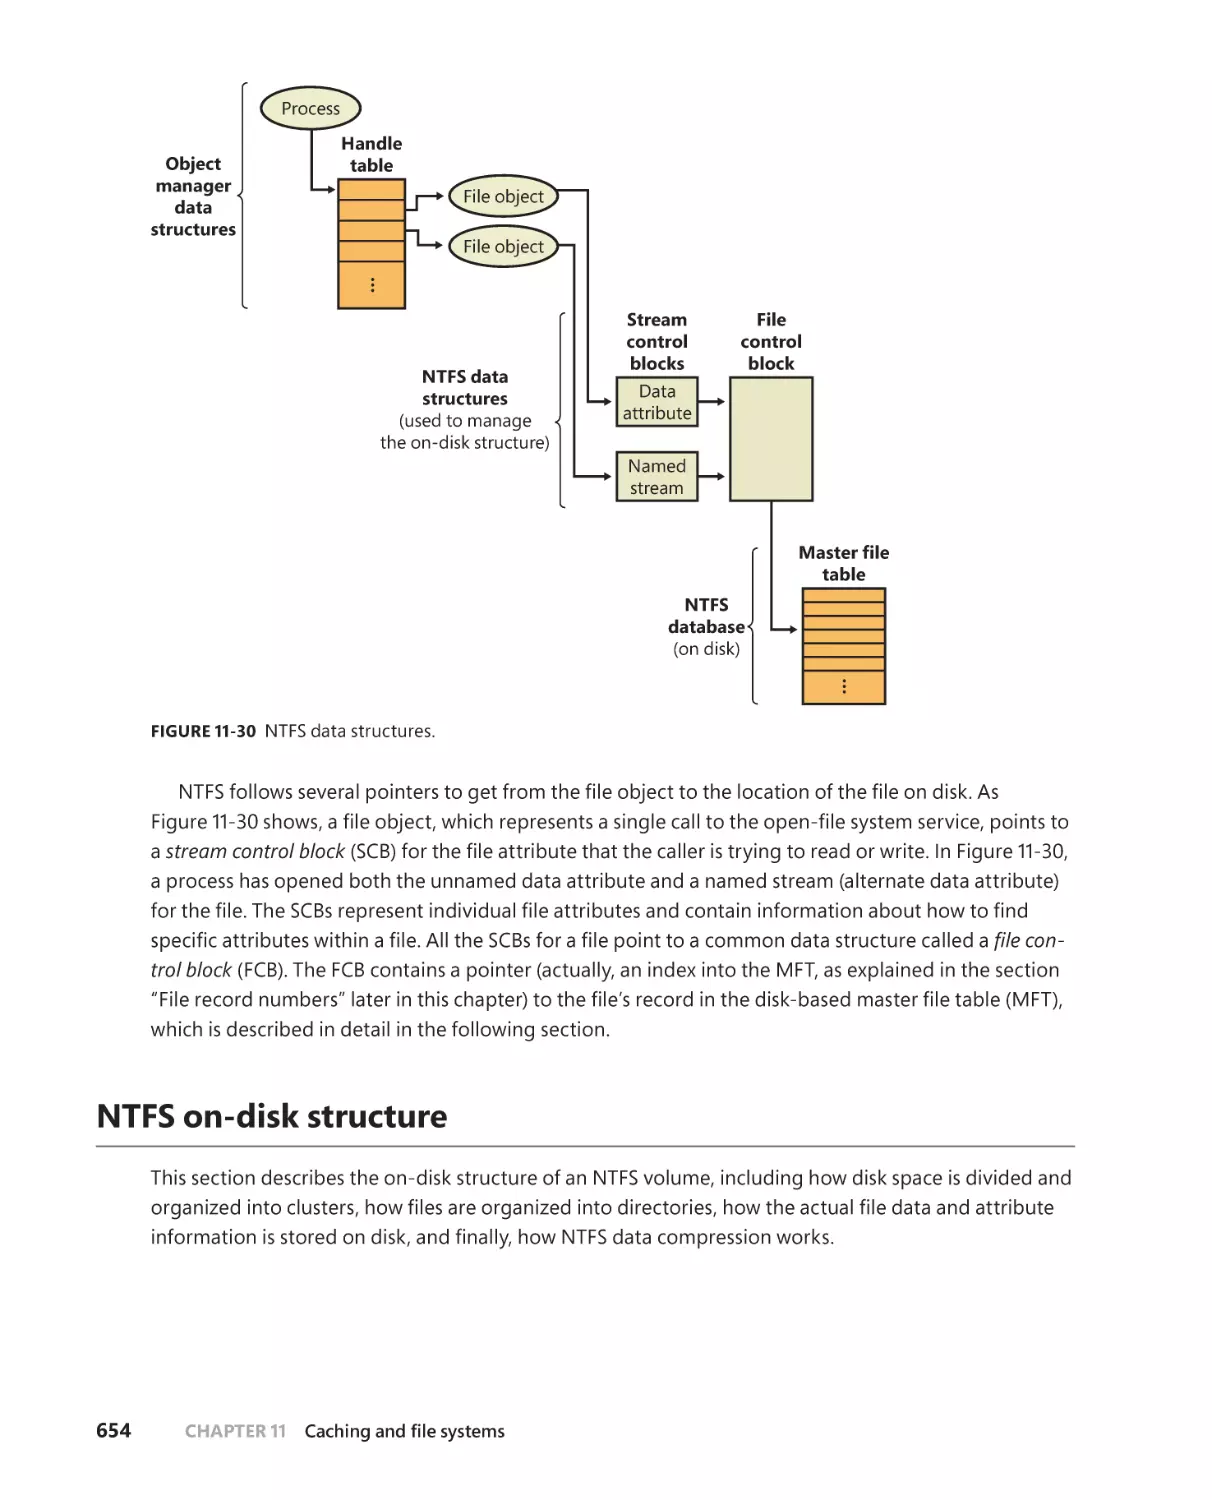 NTFS on-disk structure